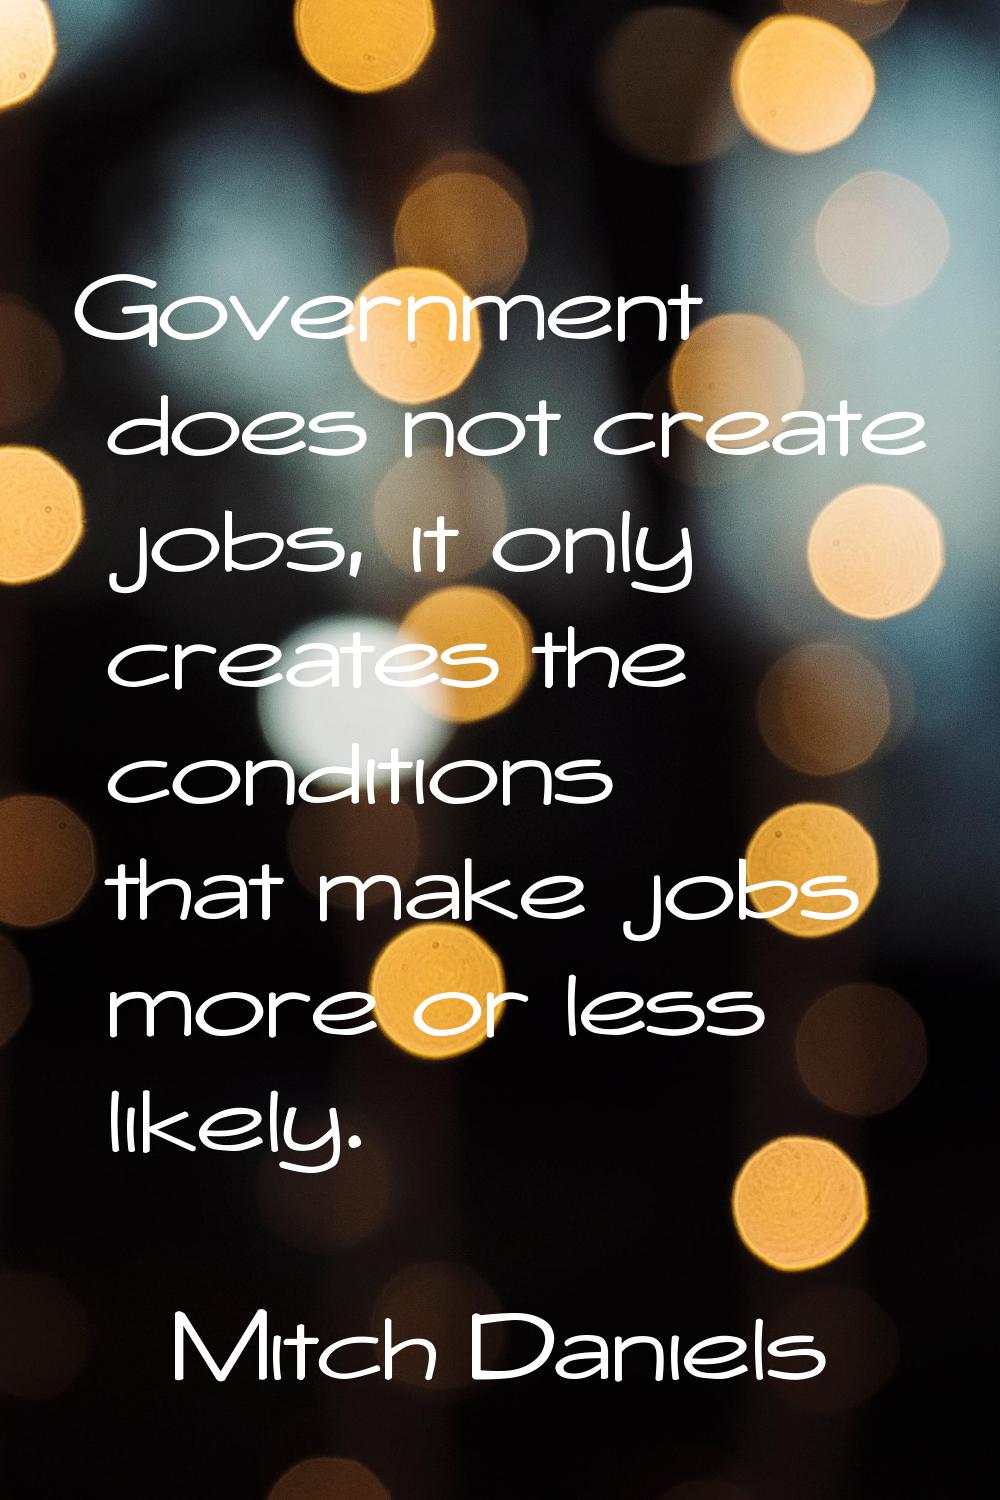 Government does not create jobs, it only creates the conditions that make jobs more or less likely.